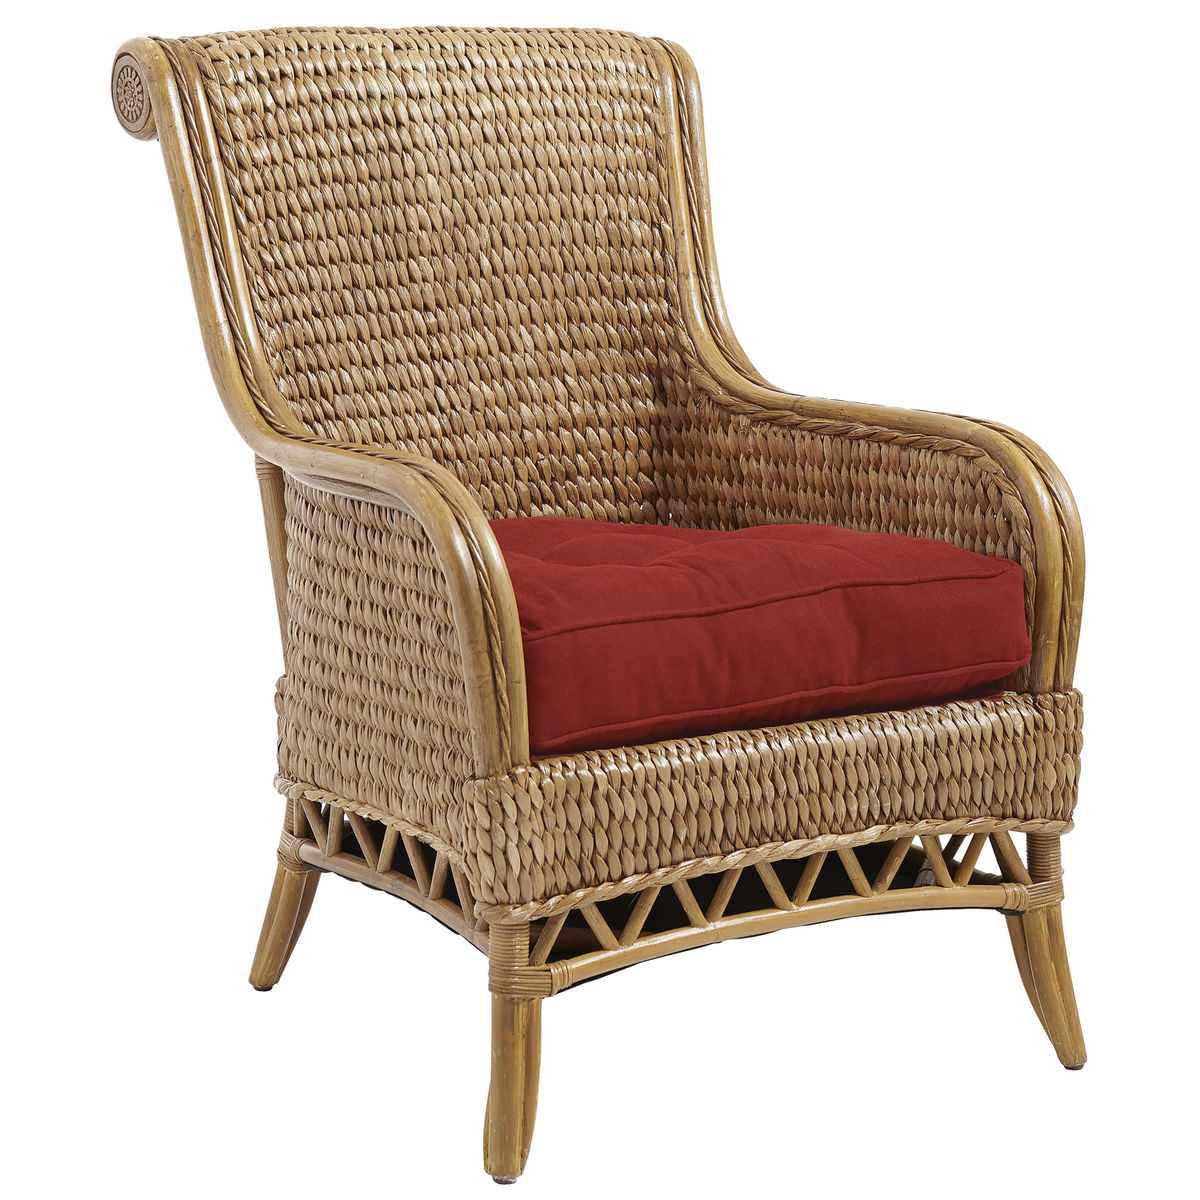 15 Adorably Preppy Accent Chairs from Pier 1 - Kelly in ...